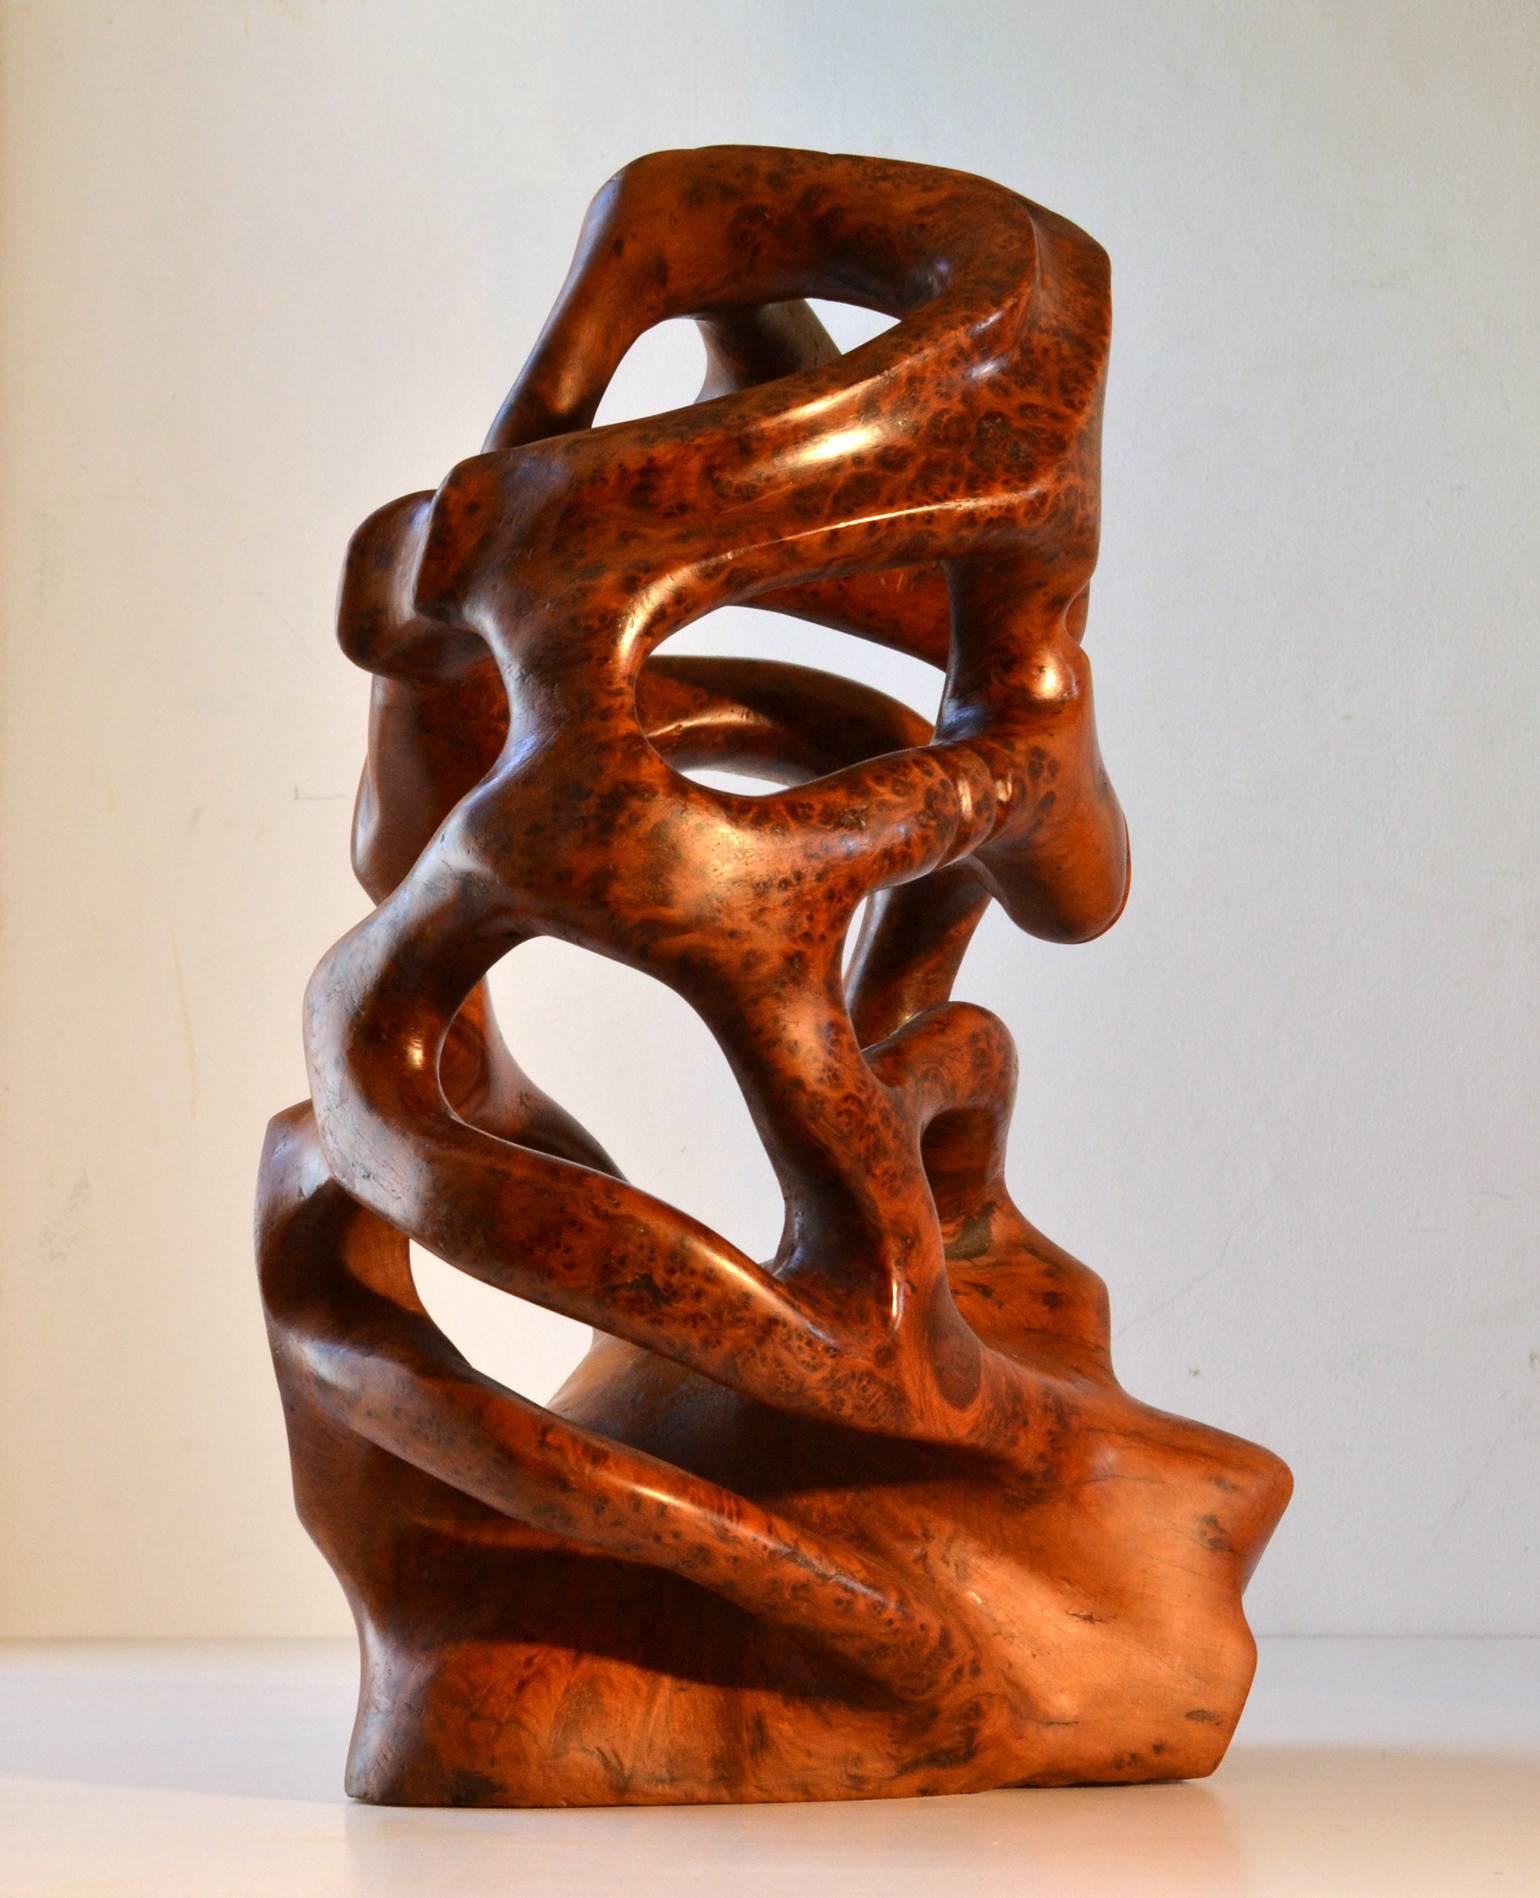 yew wood carving